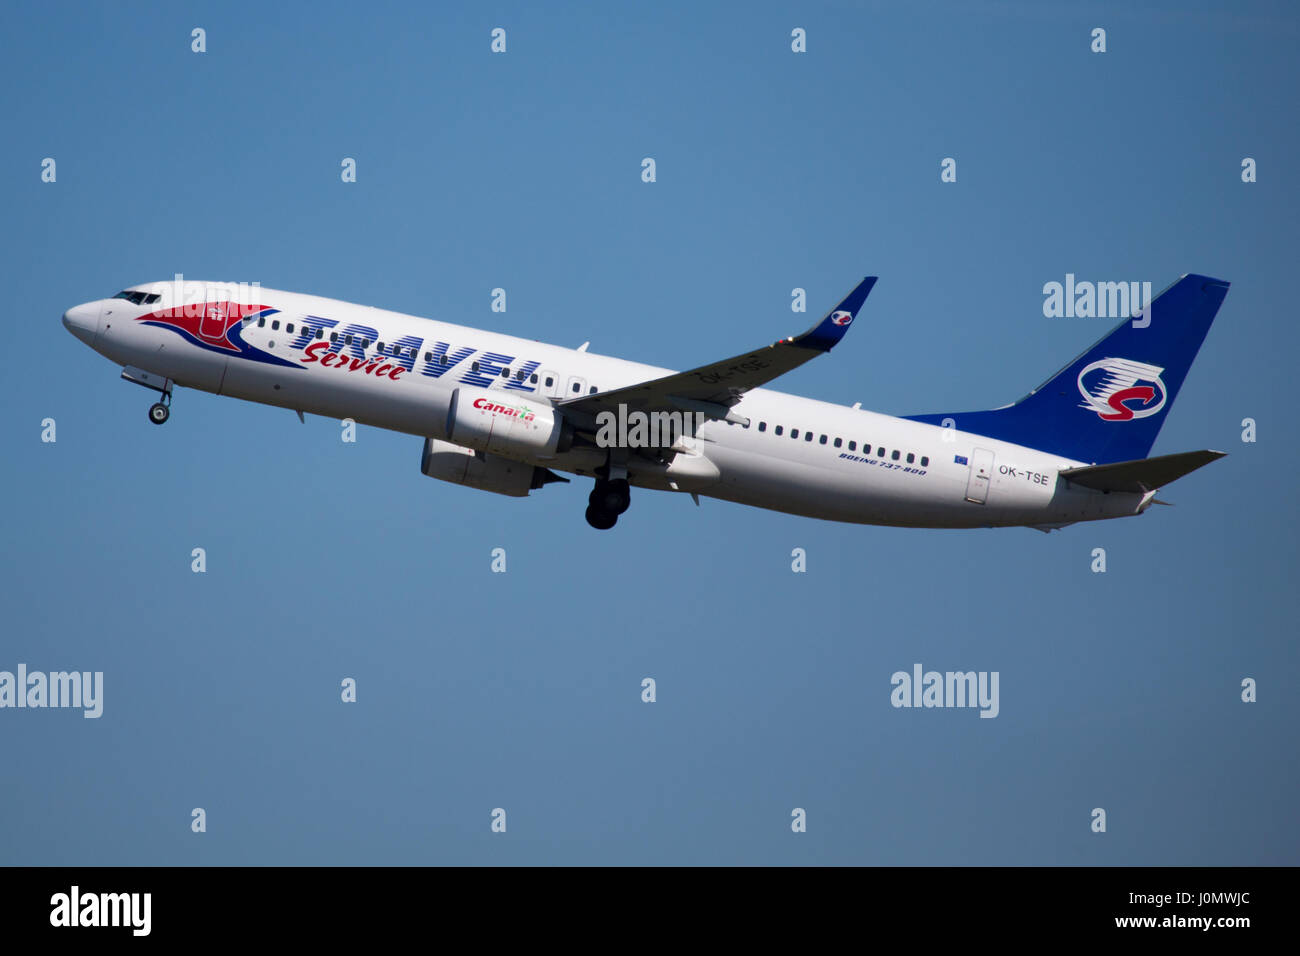 Travel Service Boeing 737 Aircraft Stock Photo